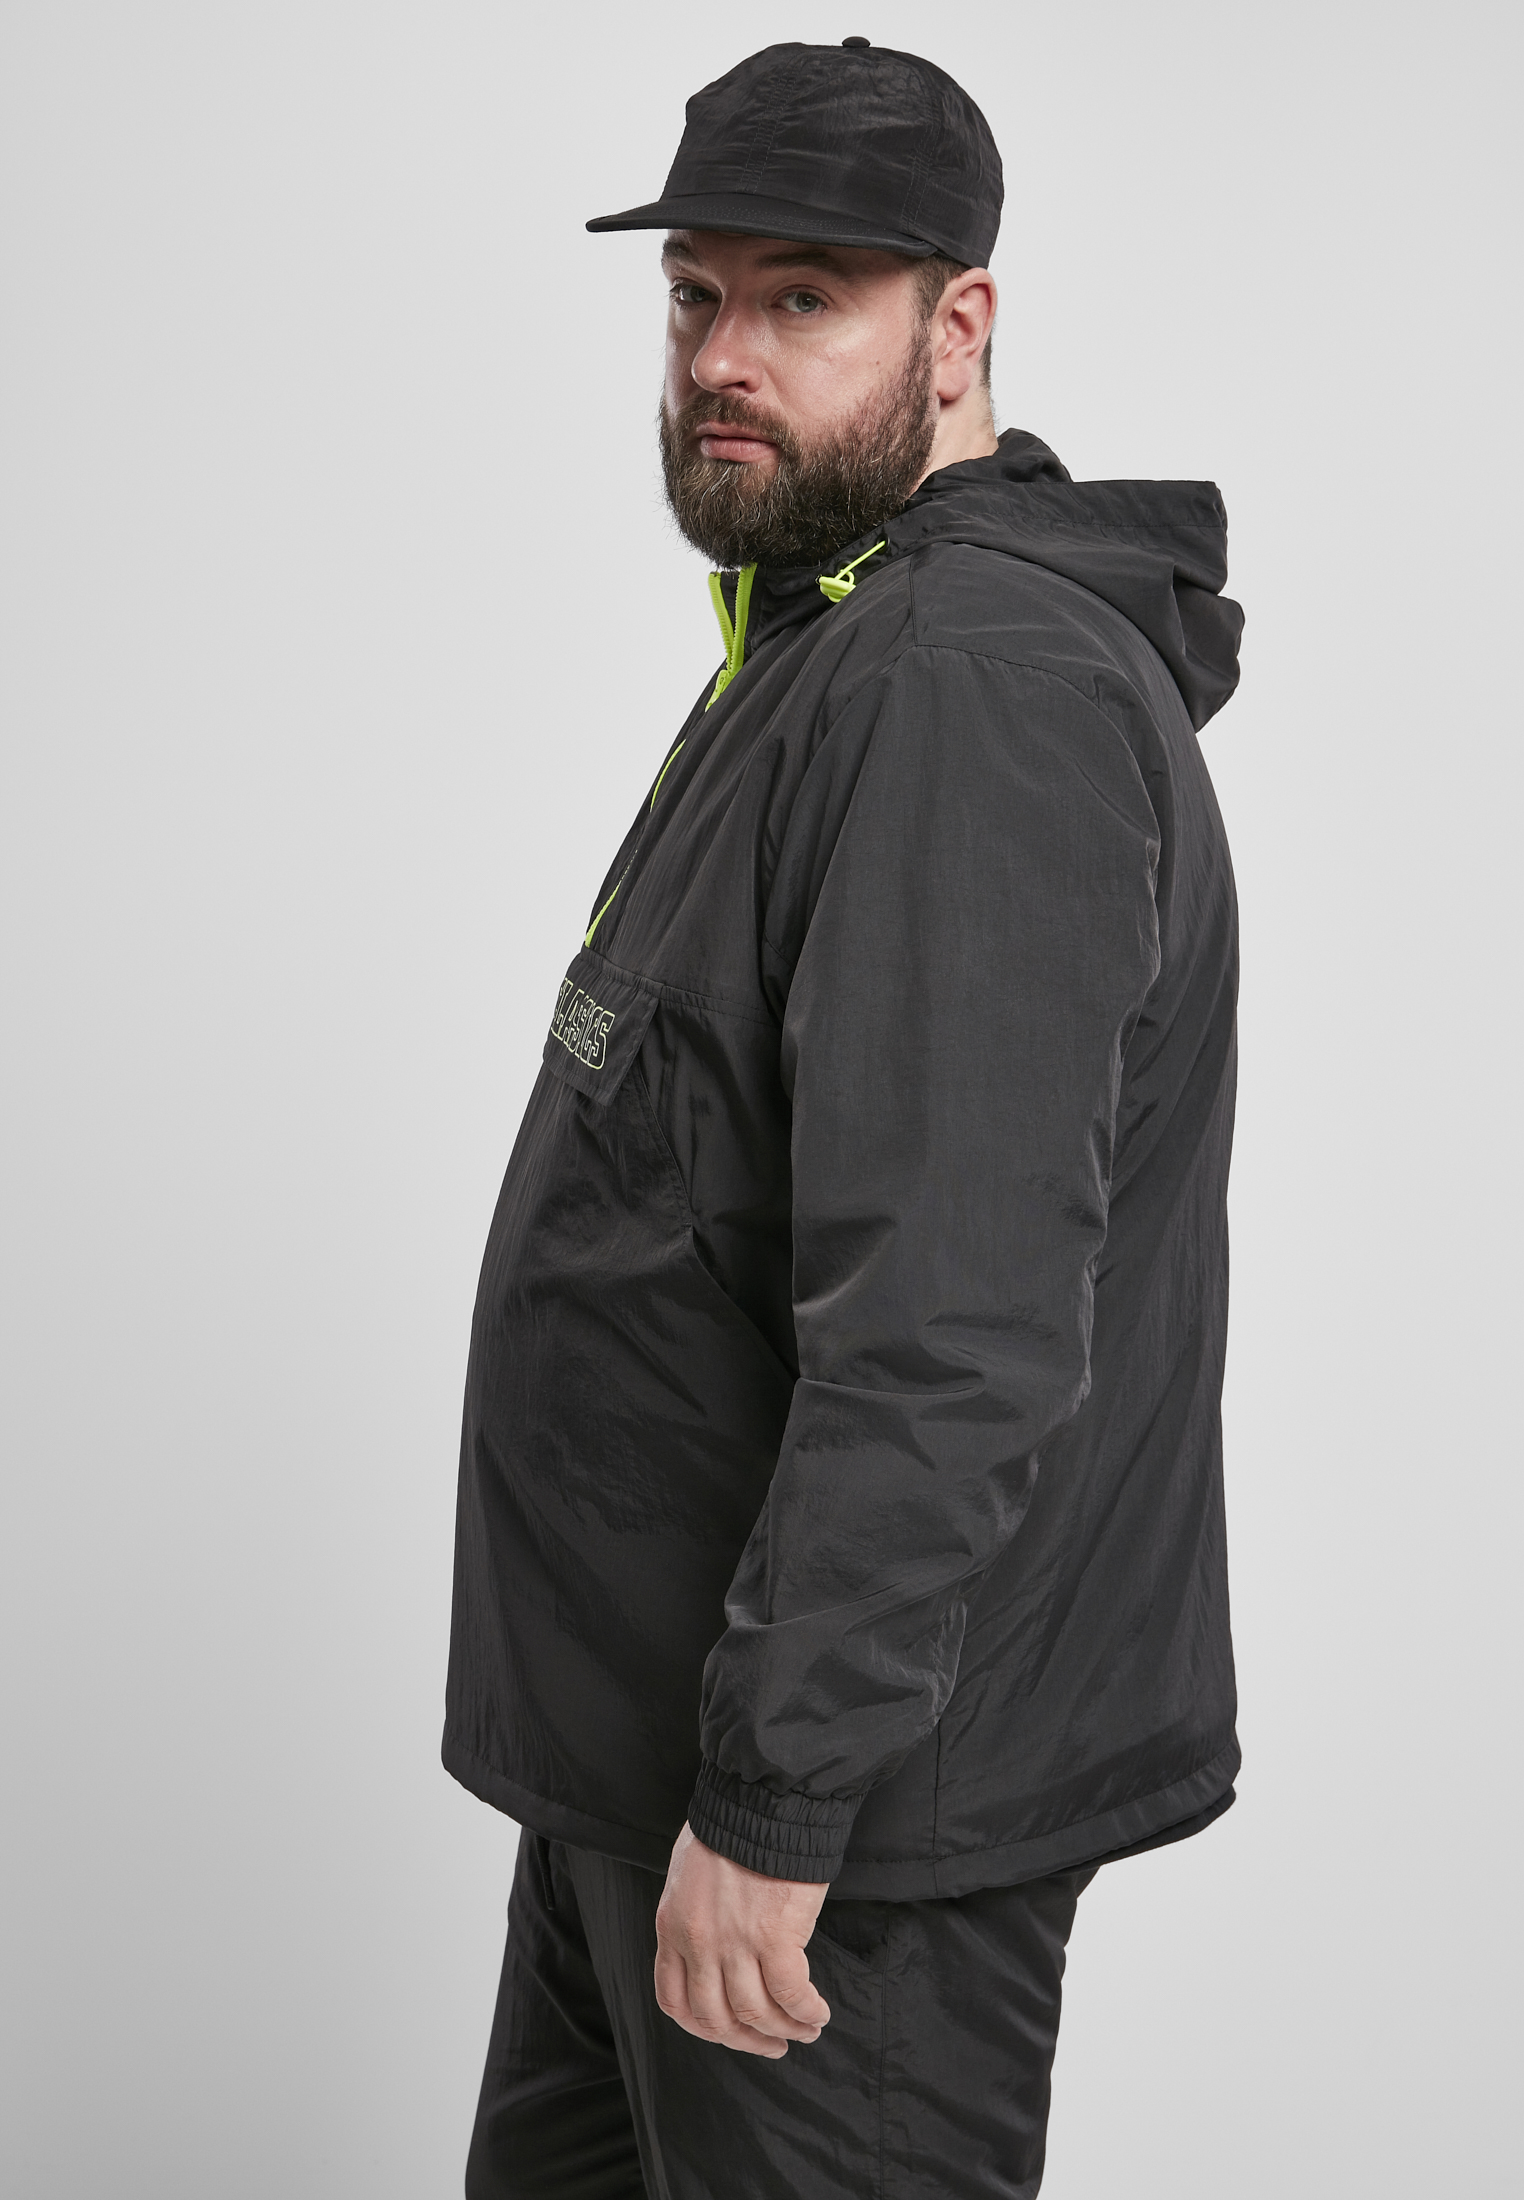 Light Jackets Contrast Pull Over Jacket in Farbe black/electriclime